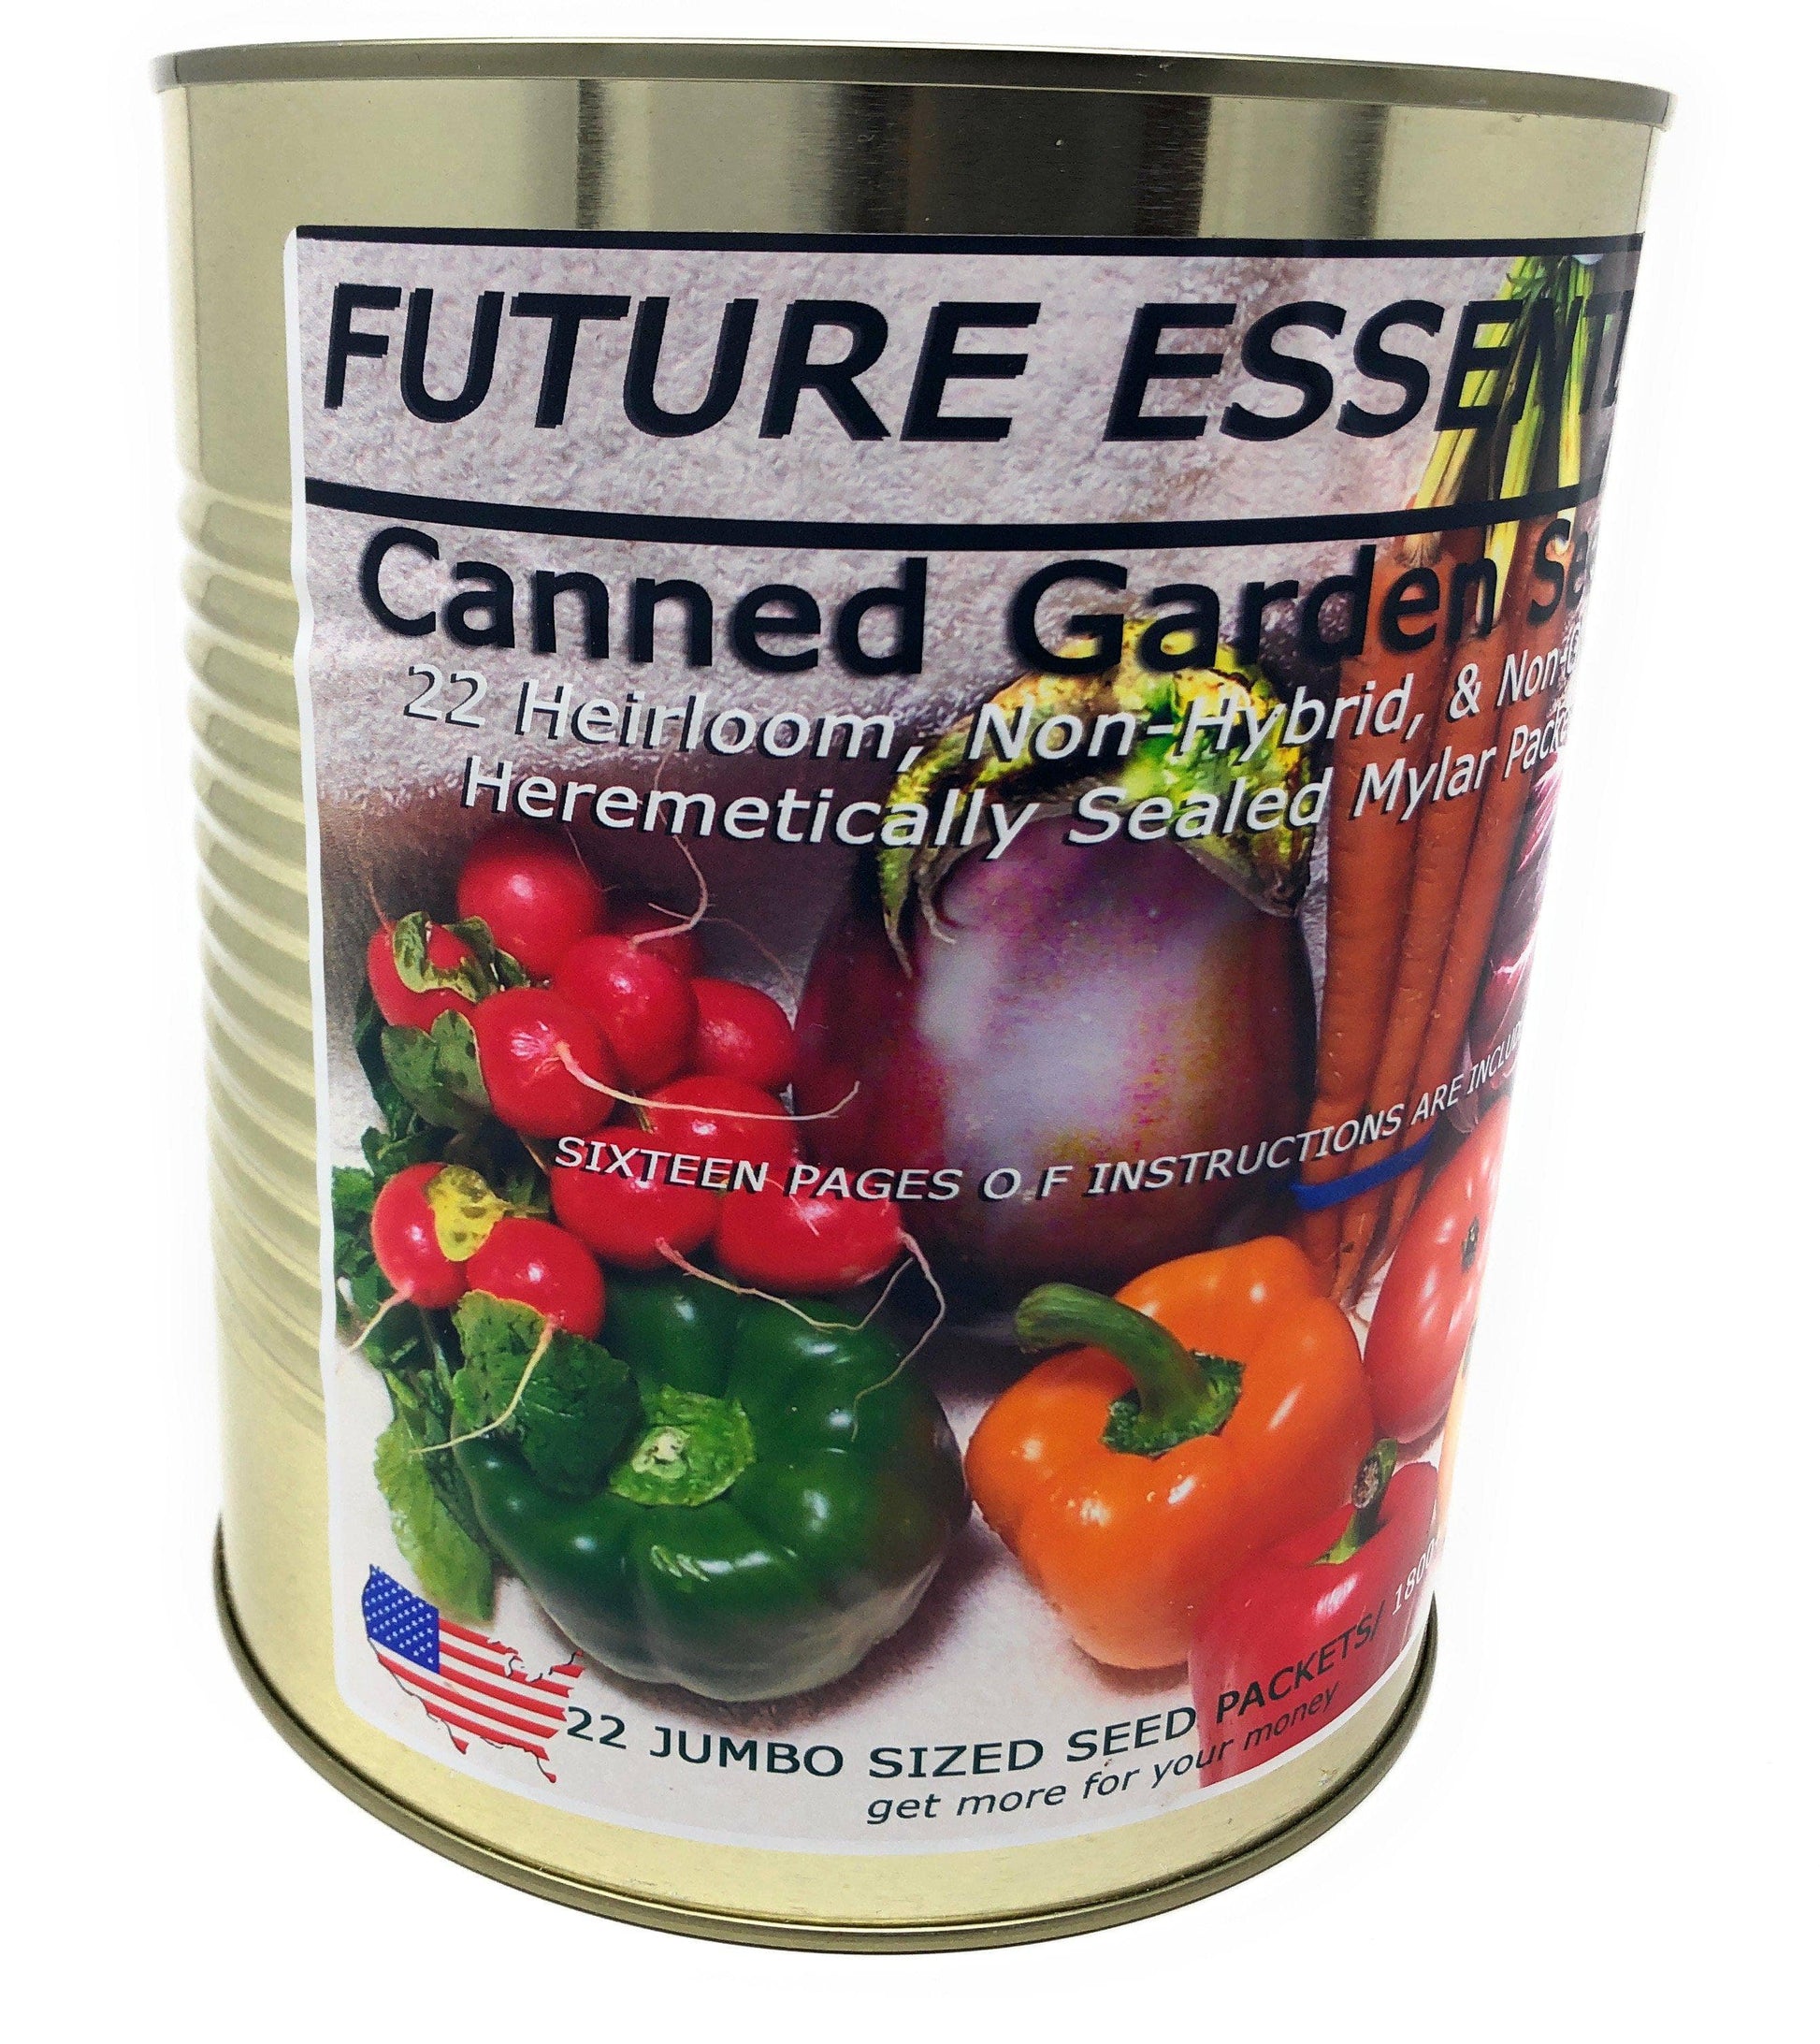 22 Different Heirloom/Non-GMO Canned Vegetable / Garden Seeds